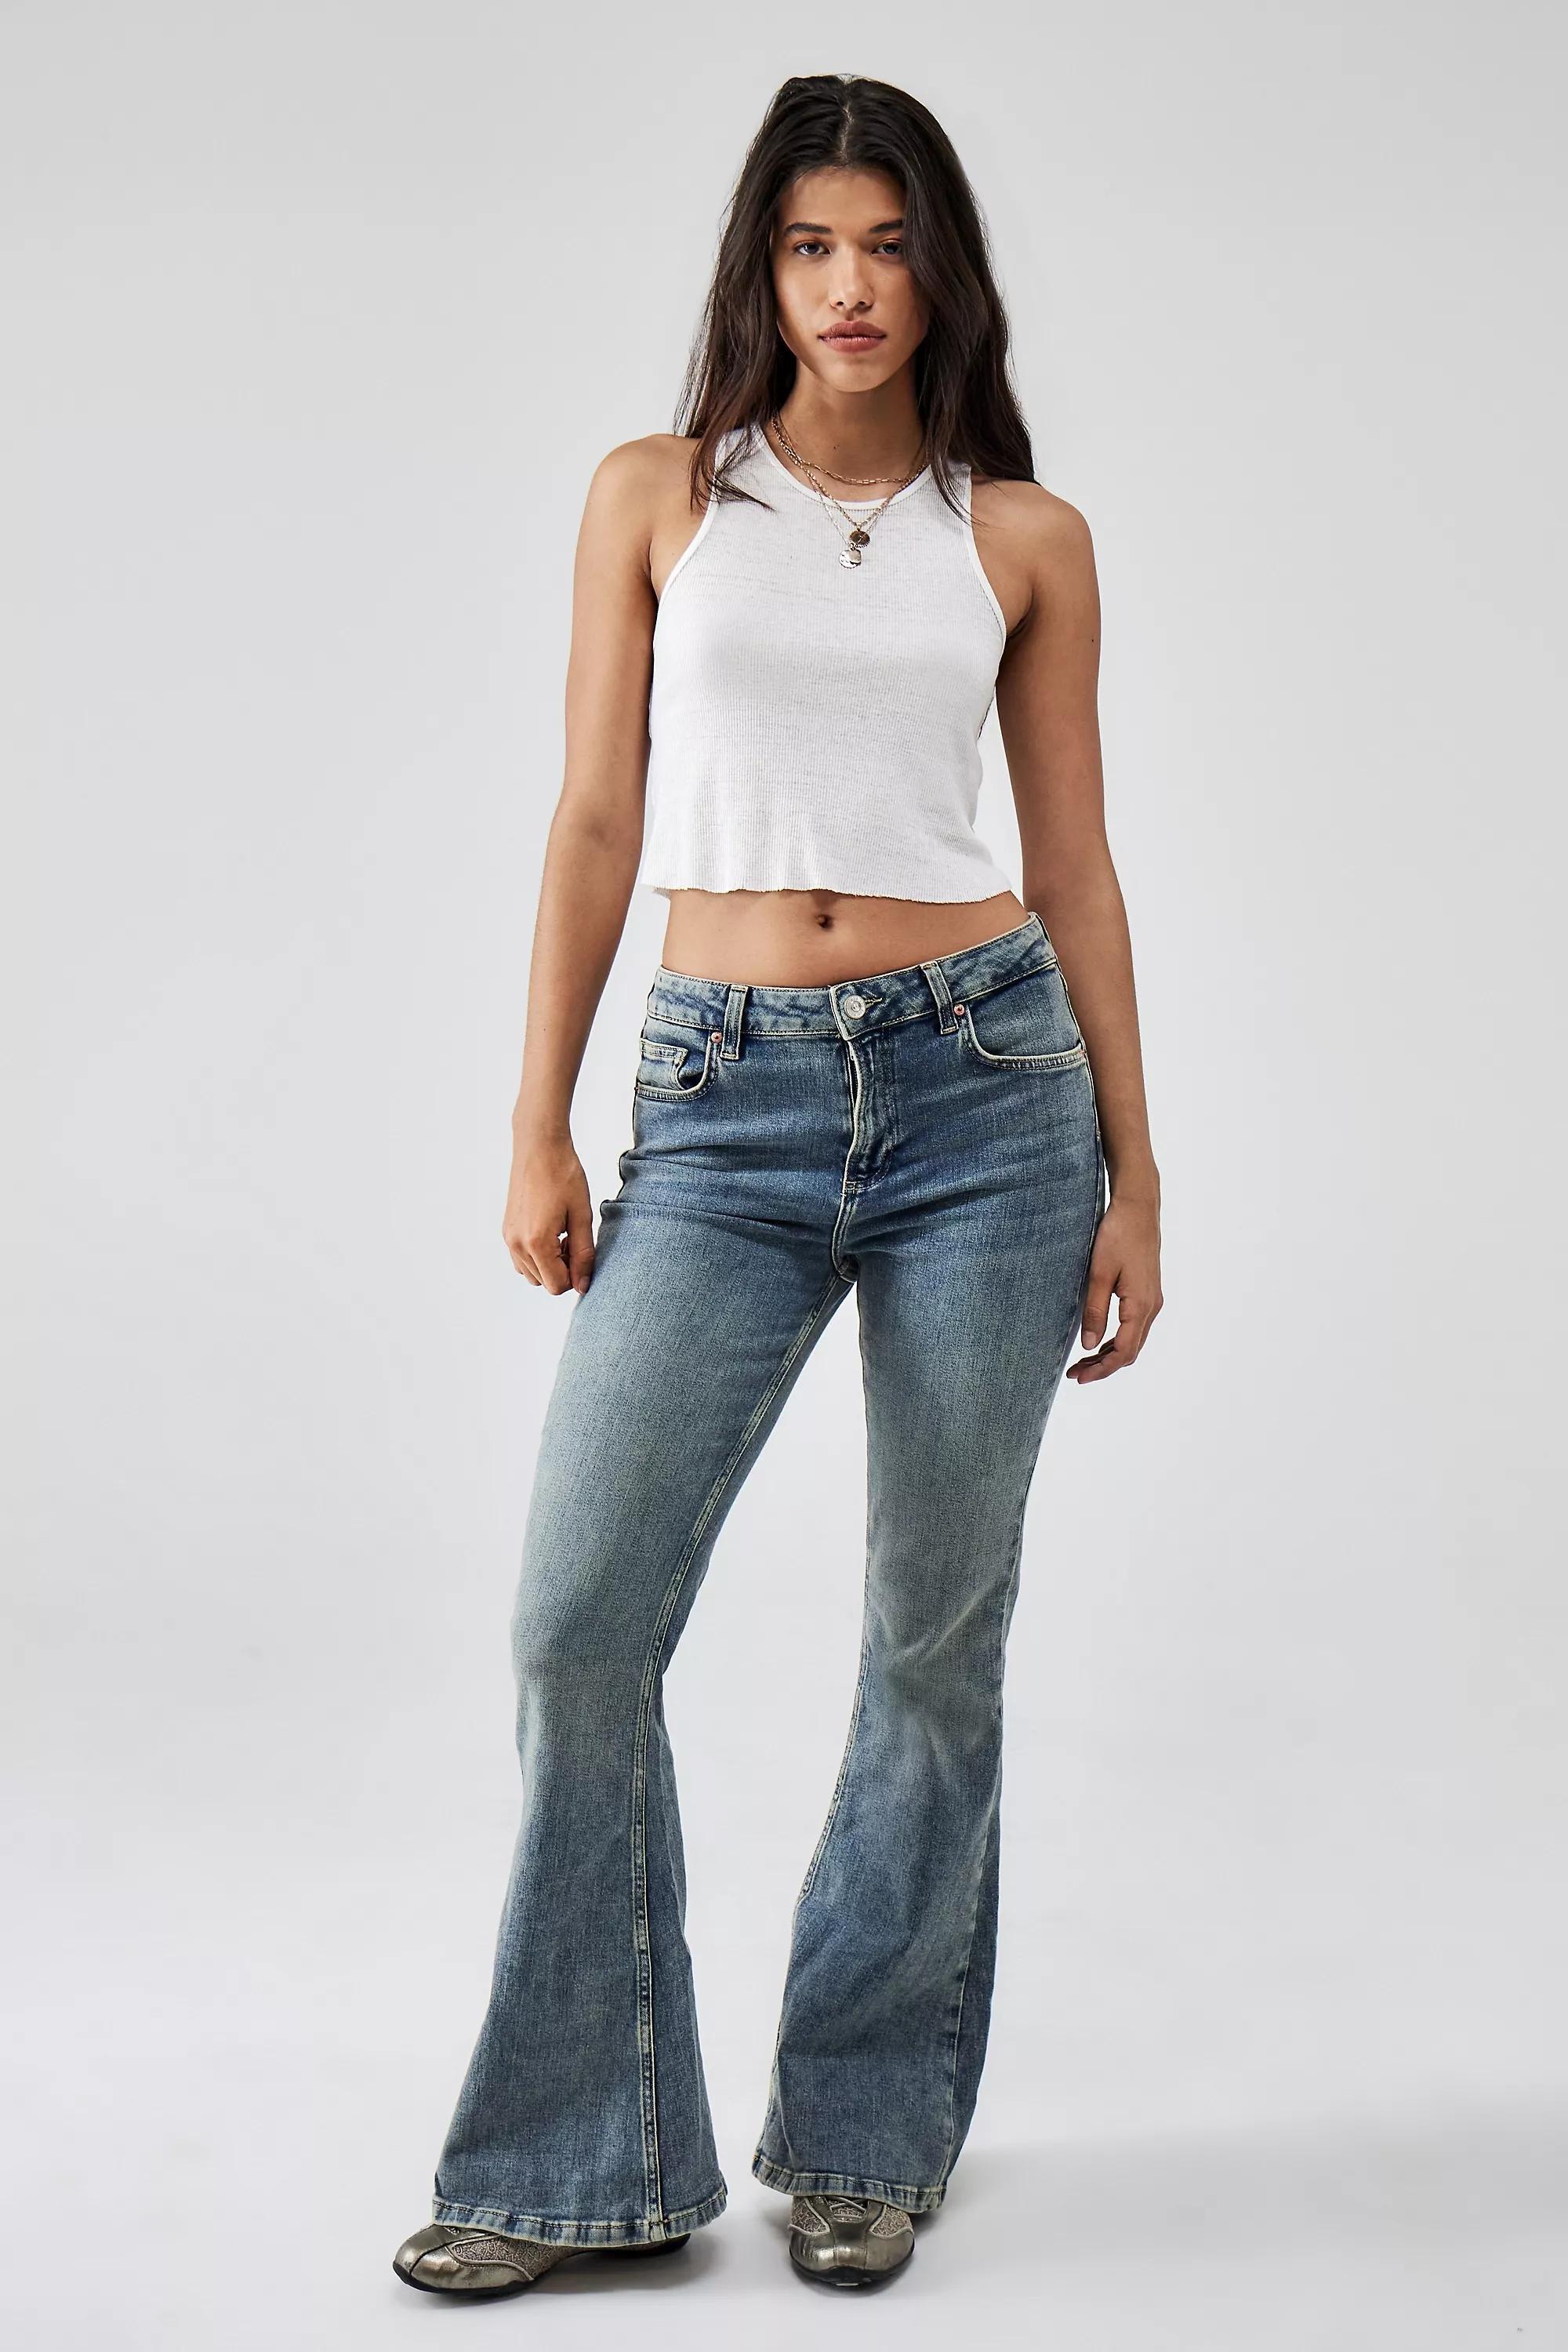 Urban Outfitters - Blue Light Bdg Distressed Flare Cowb